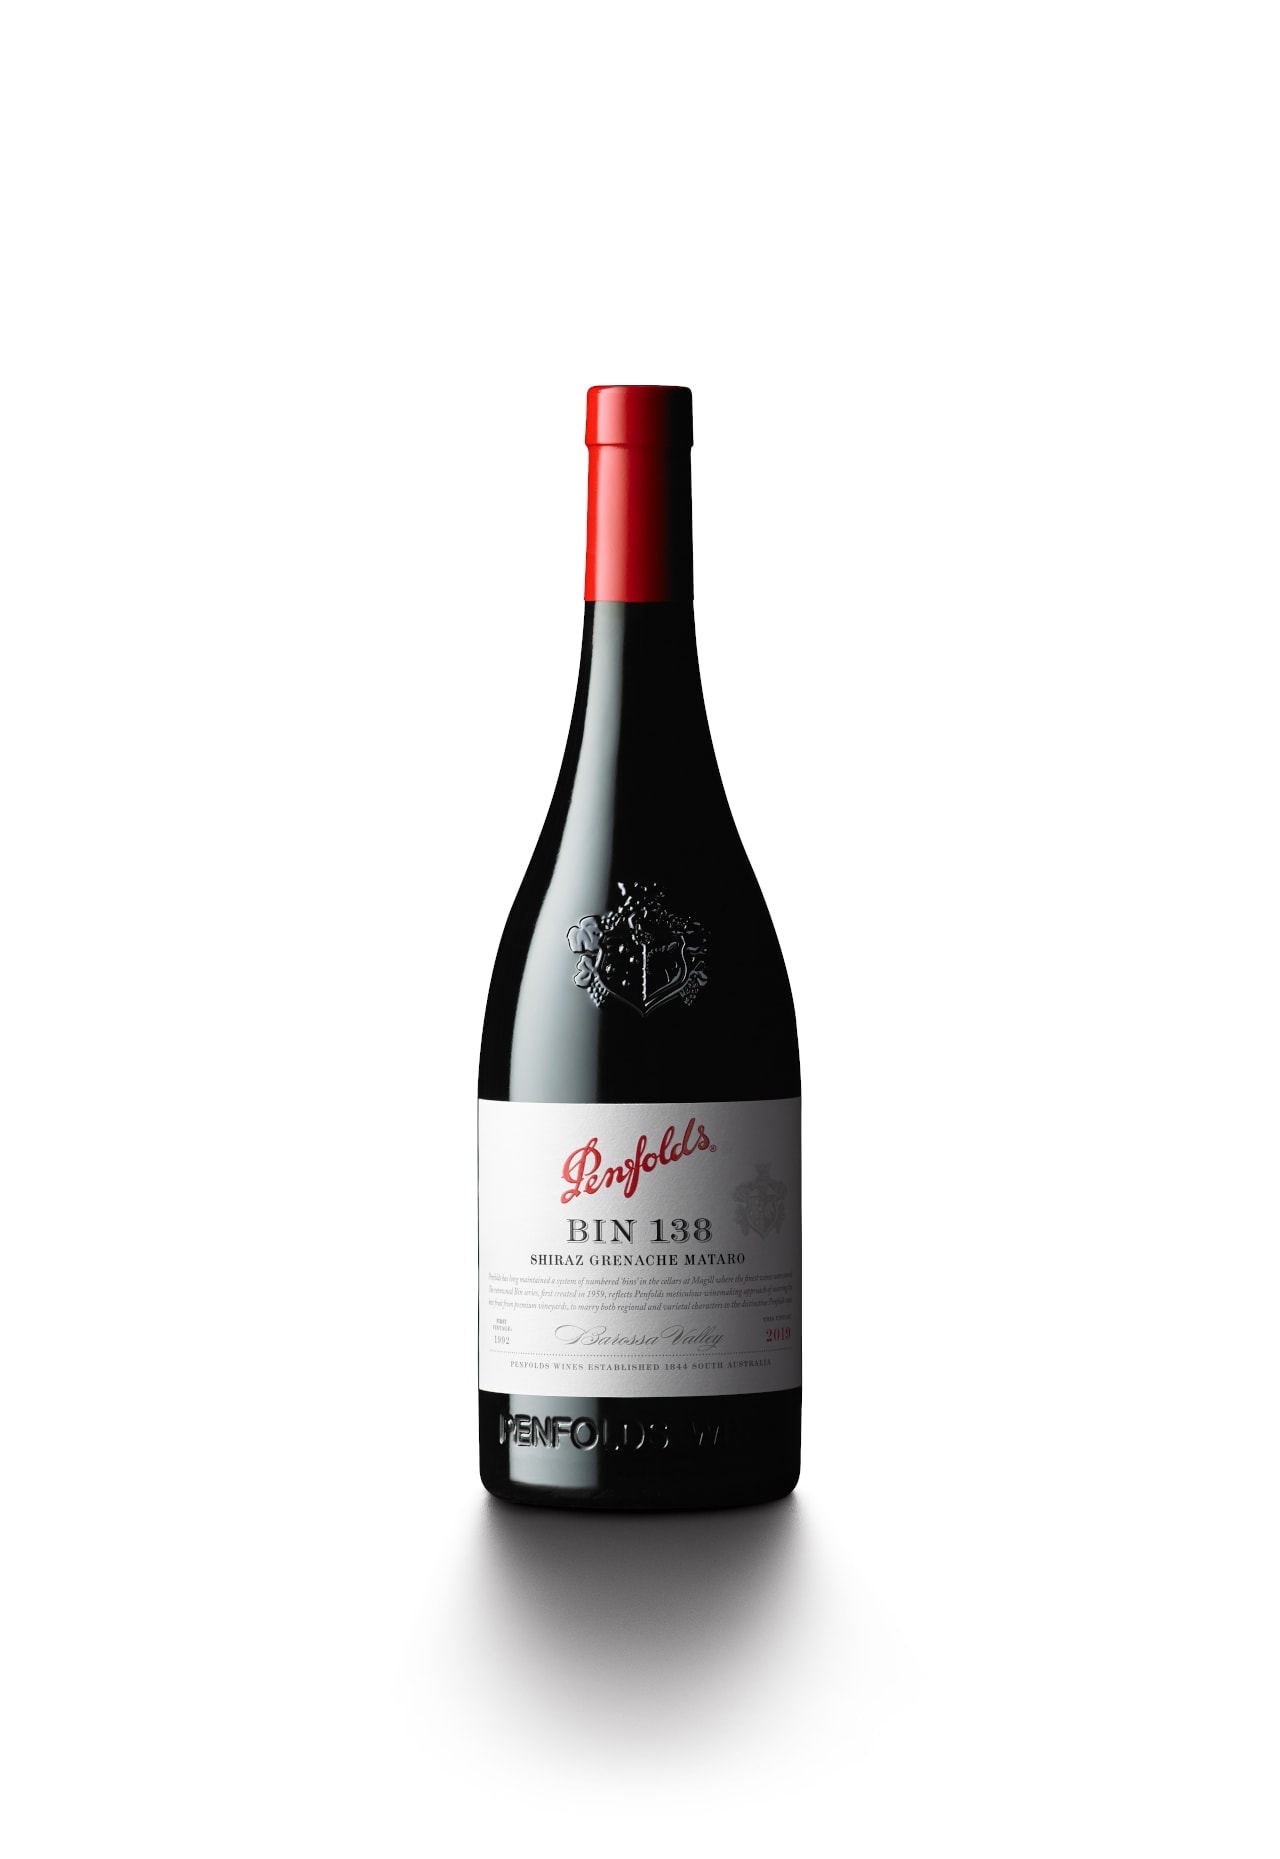 Penfolds Bin 138 Barossa Valley Shiraz Grenache Mataro 2019 Cork 60 22Subtle And Elegant Well Suited To The Marinemineral Inducements Of Many Asian Foods – Perfect With Sushi.22